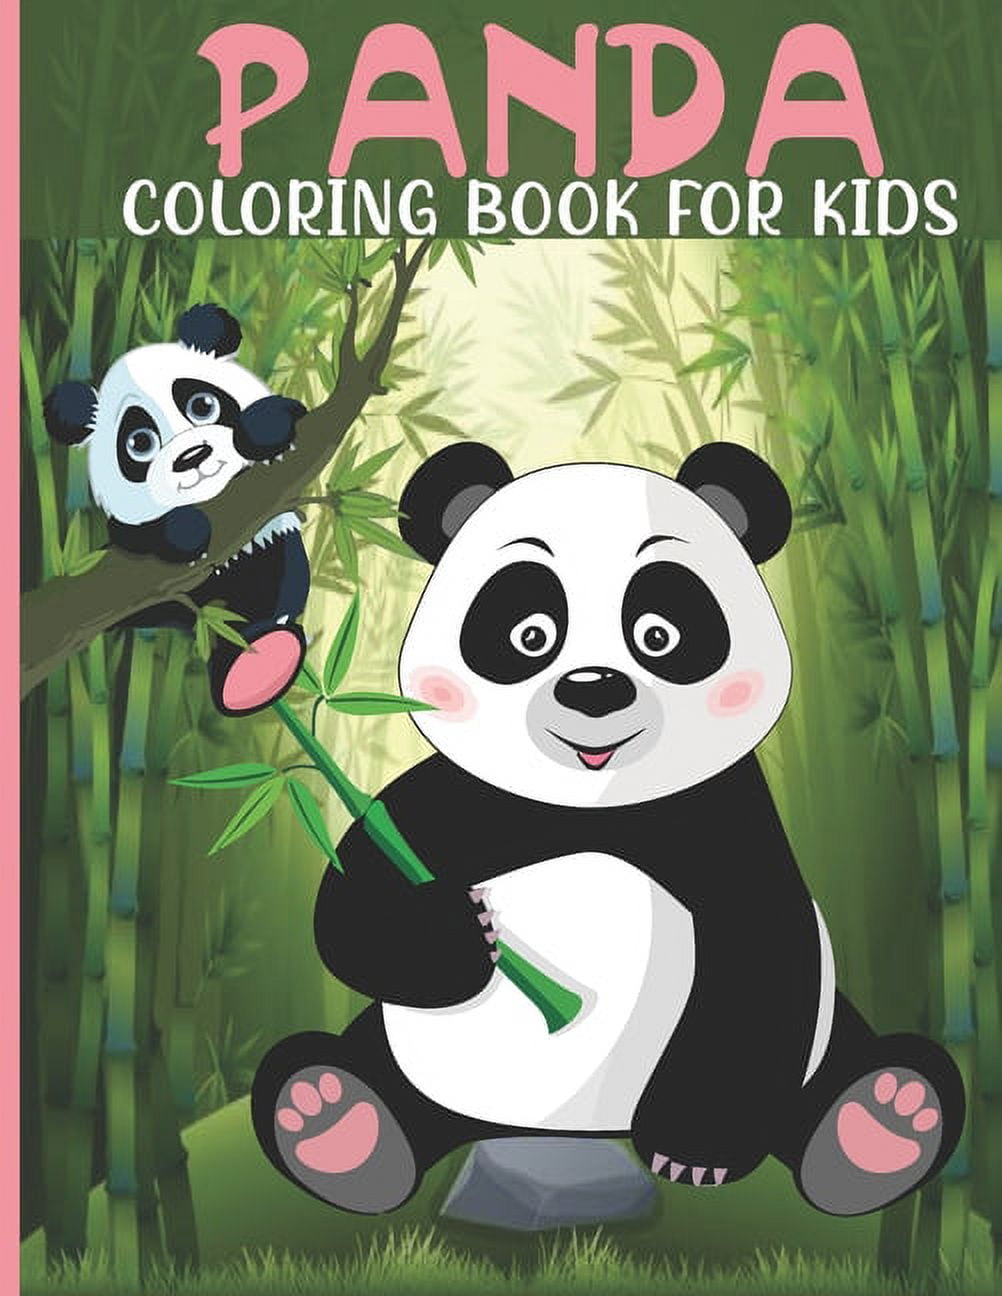 Panda Coloring Book For Girls Ages 8-12: Find Relaxation And Mindfulness  with Stress Relieving Coloring Pages for Kids, Perfect Christmas Gift or  Pres (Paperback)